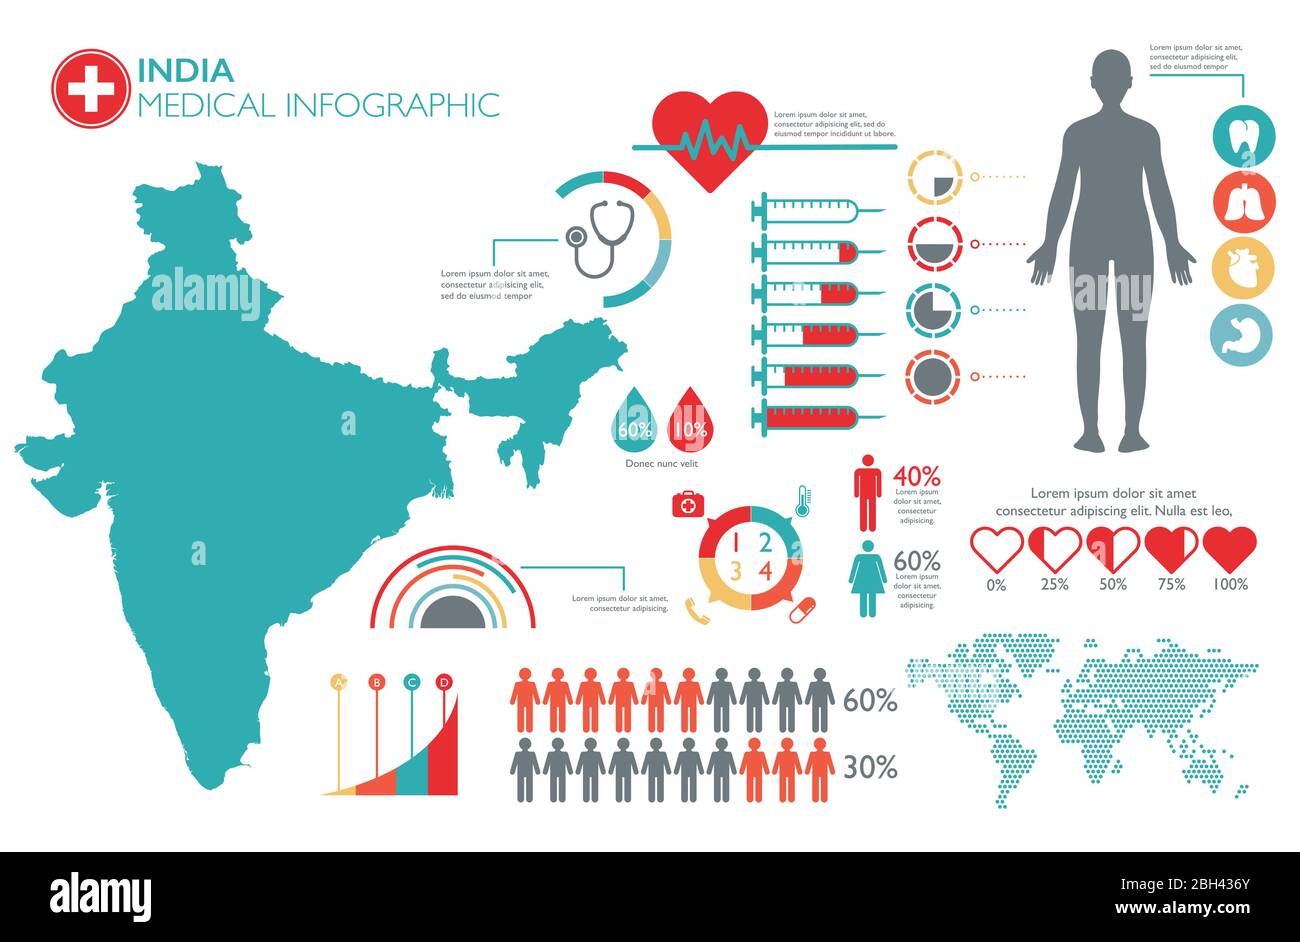 India medical healthcare infographic template with map and multiple charts Stock Vector